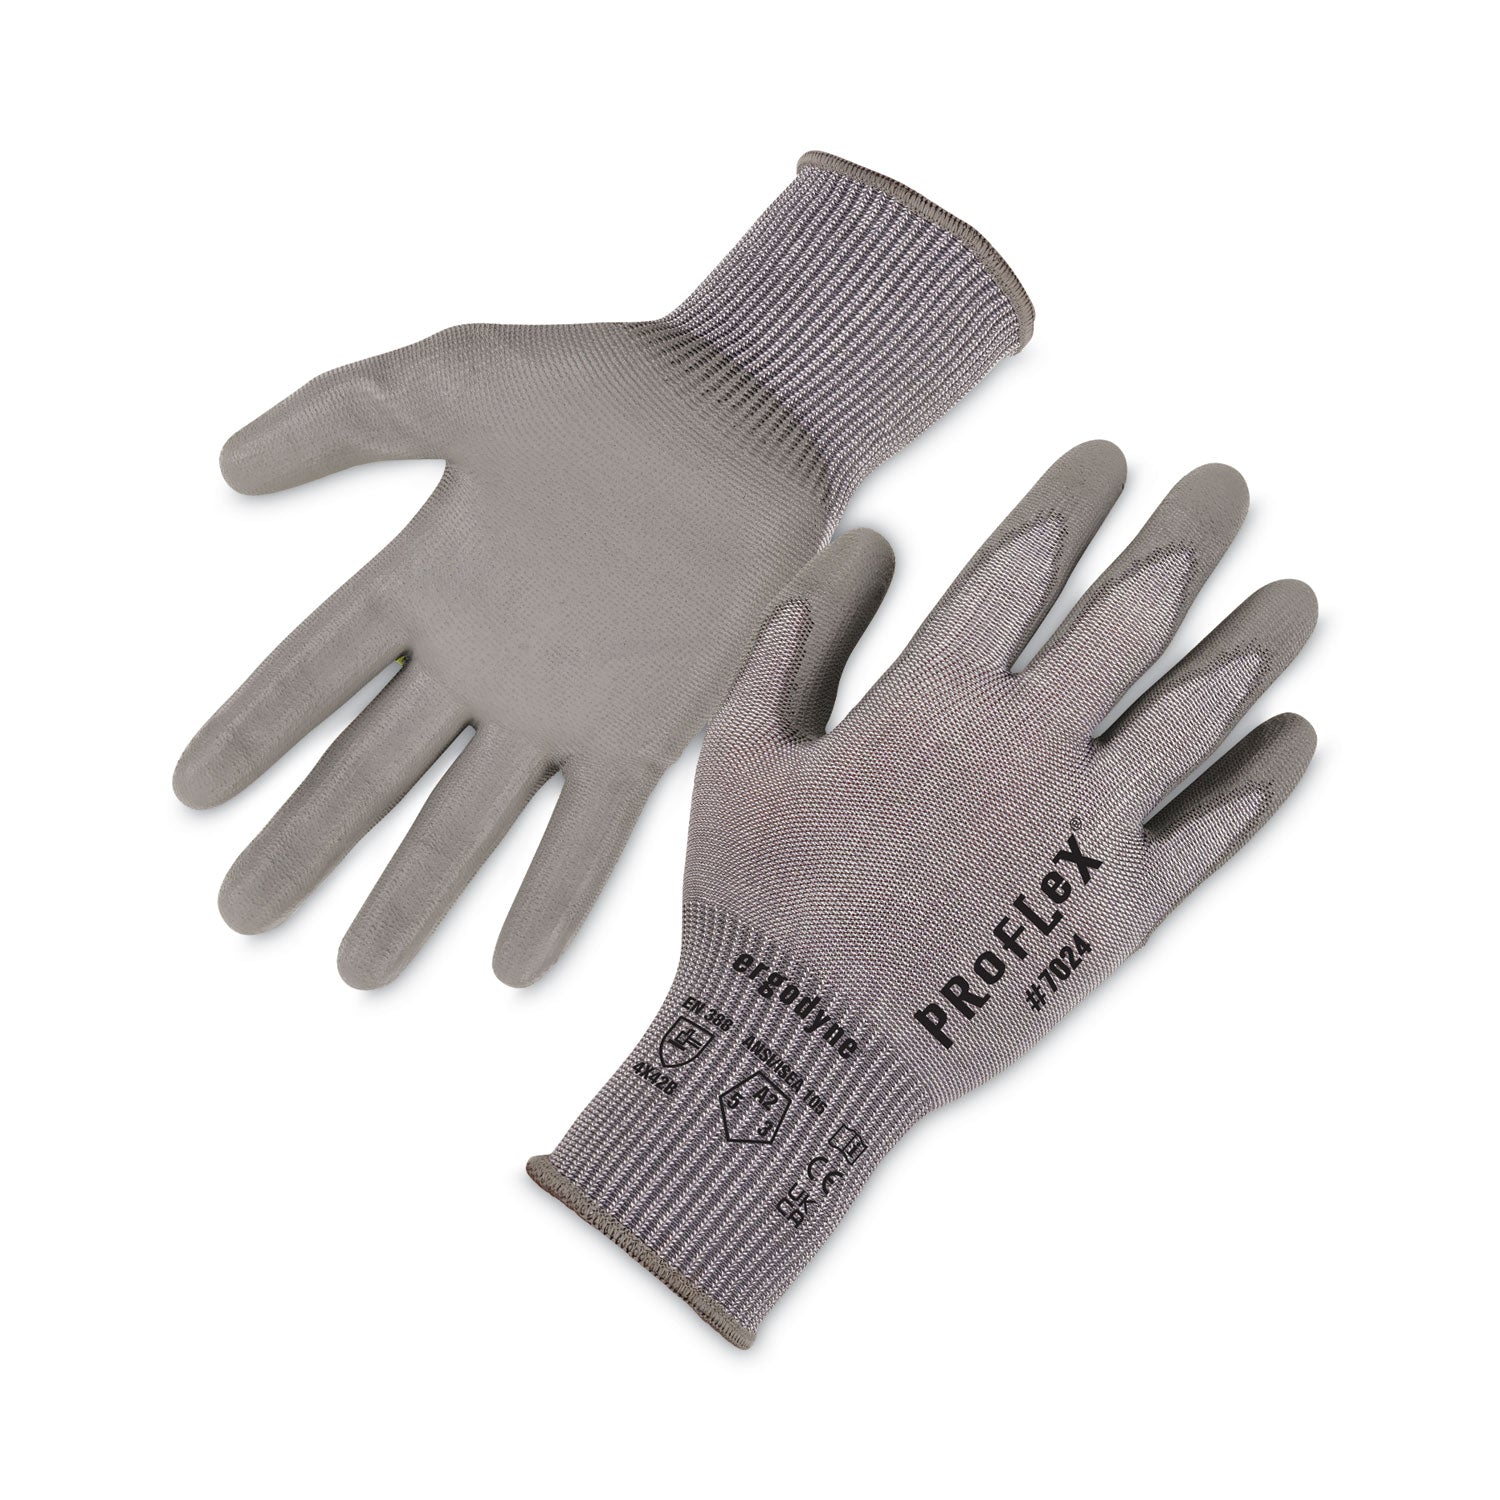 proflex-7024-ansi-a2-pu-coated-cr-gloves-gray-small-12-pairs-pack-ships-in-1-3-business-days_ego10392 - 1